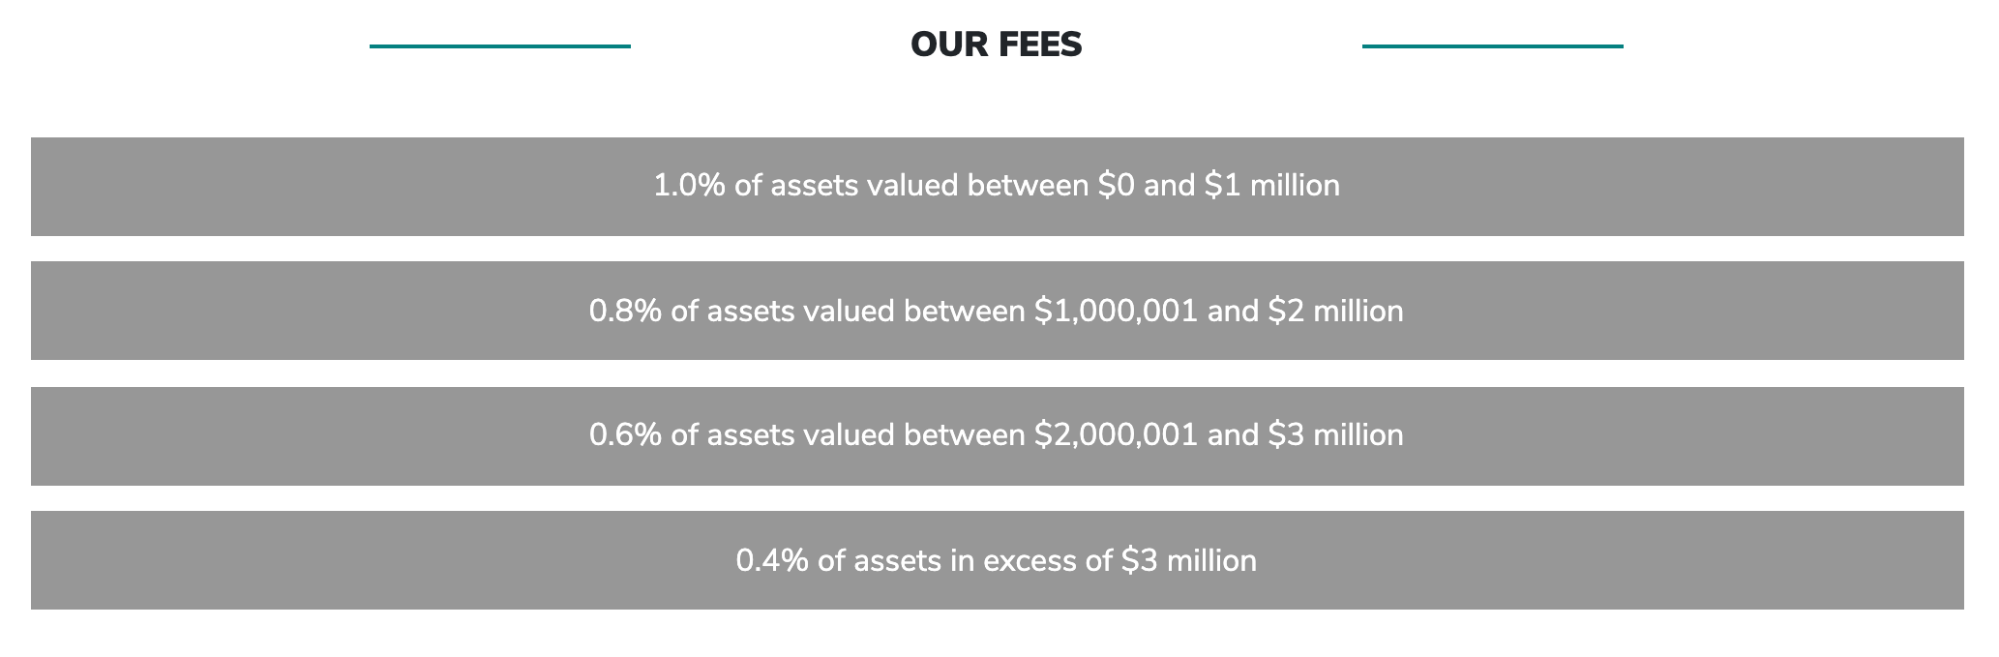 screenshot of our service fee breakdown, from our website